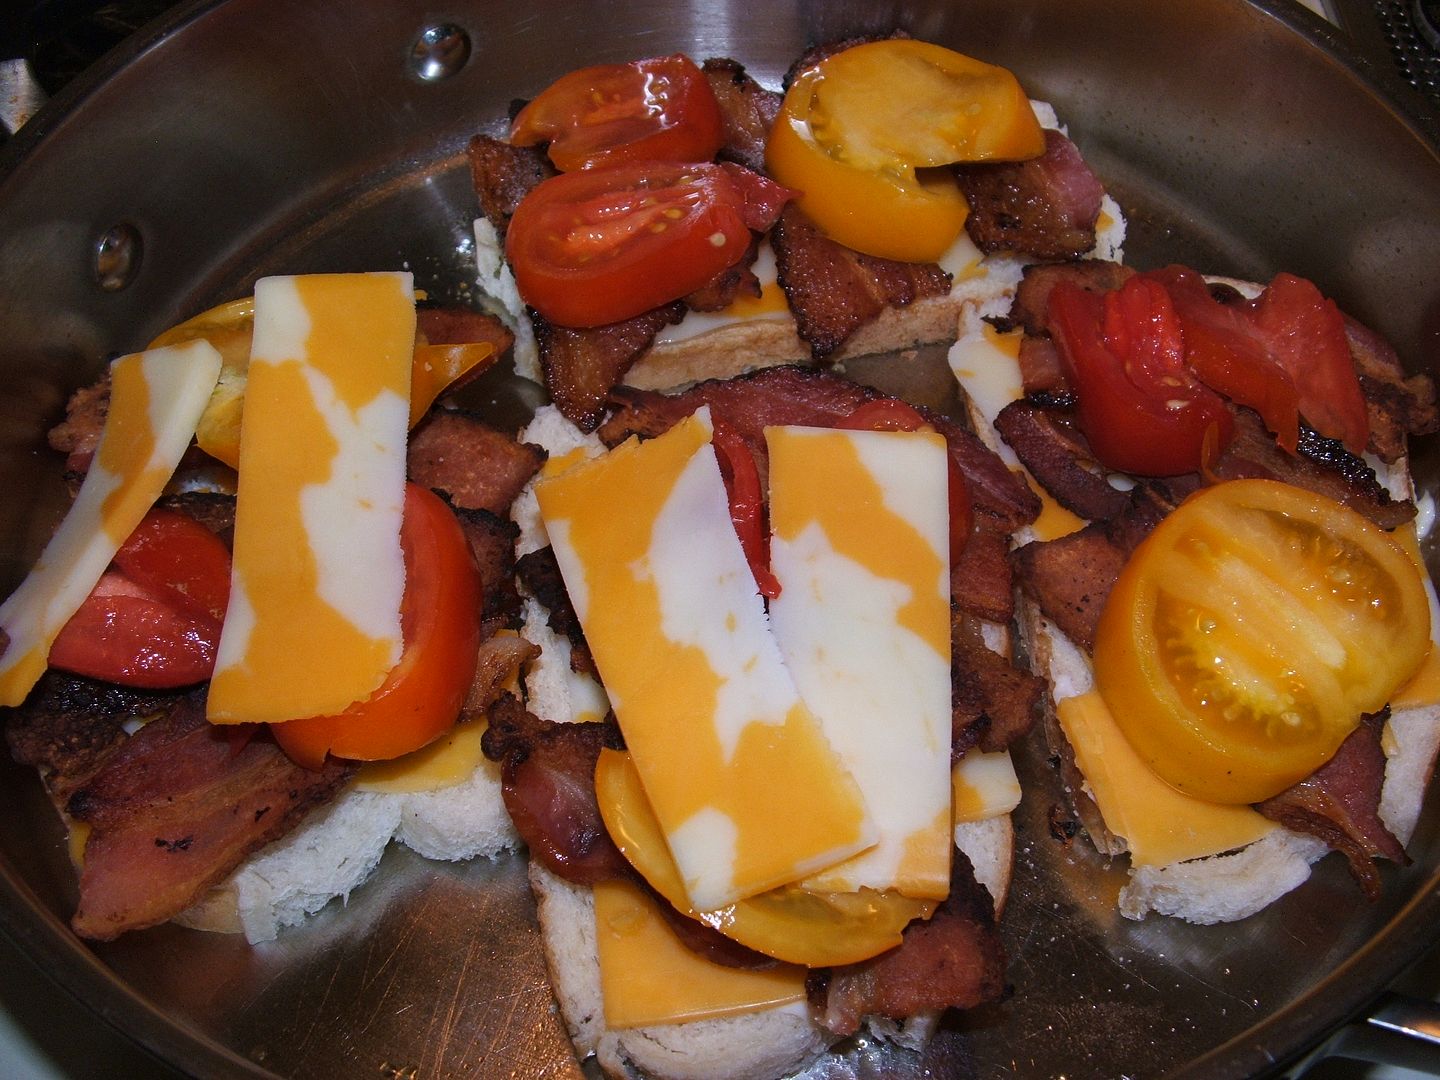 Tomato Bacon Cheese by Angie Ouellette-Tower for godsgrowinggarden.com photo 001_zps3cbcb66f.jpg